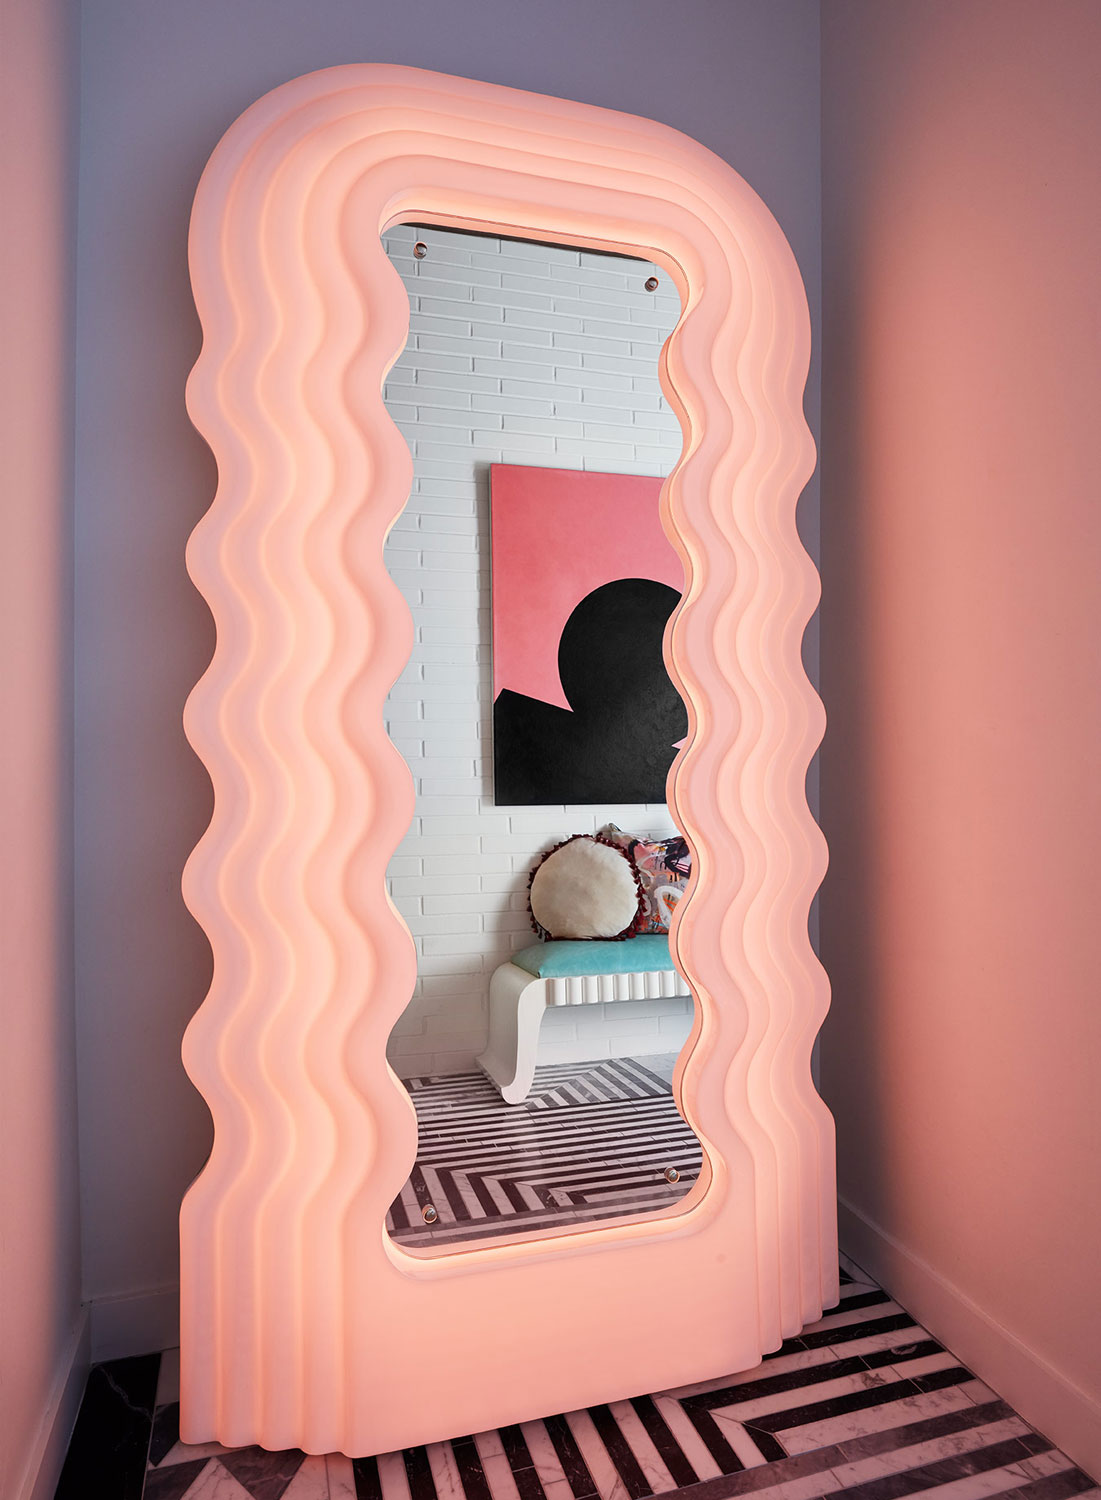 Ettore Sottsass floor mirror in Modern meets 80s home decor. Living Room. Live fearlessly with your home decor.